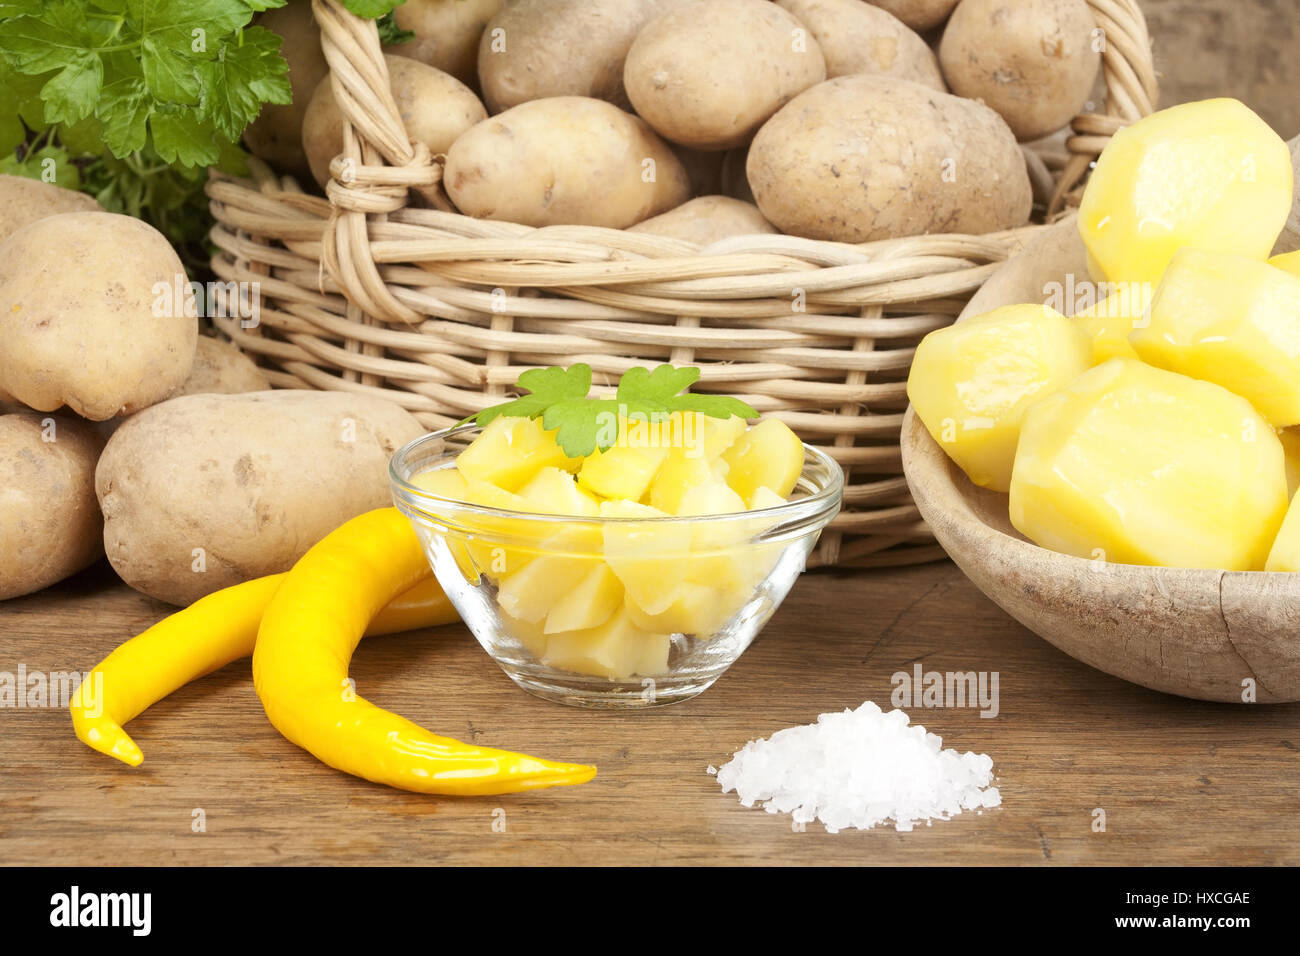 Potatoes with salt and chilli, Potatoes with salt and chilli |, Kartoffeln mit Salz und Chili |Potatoes with salt and chili| Stock Photo